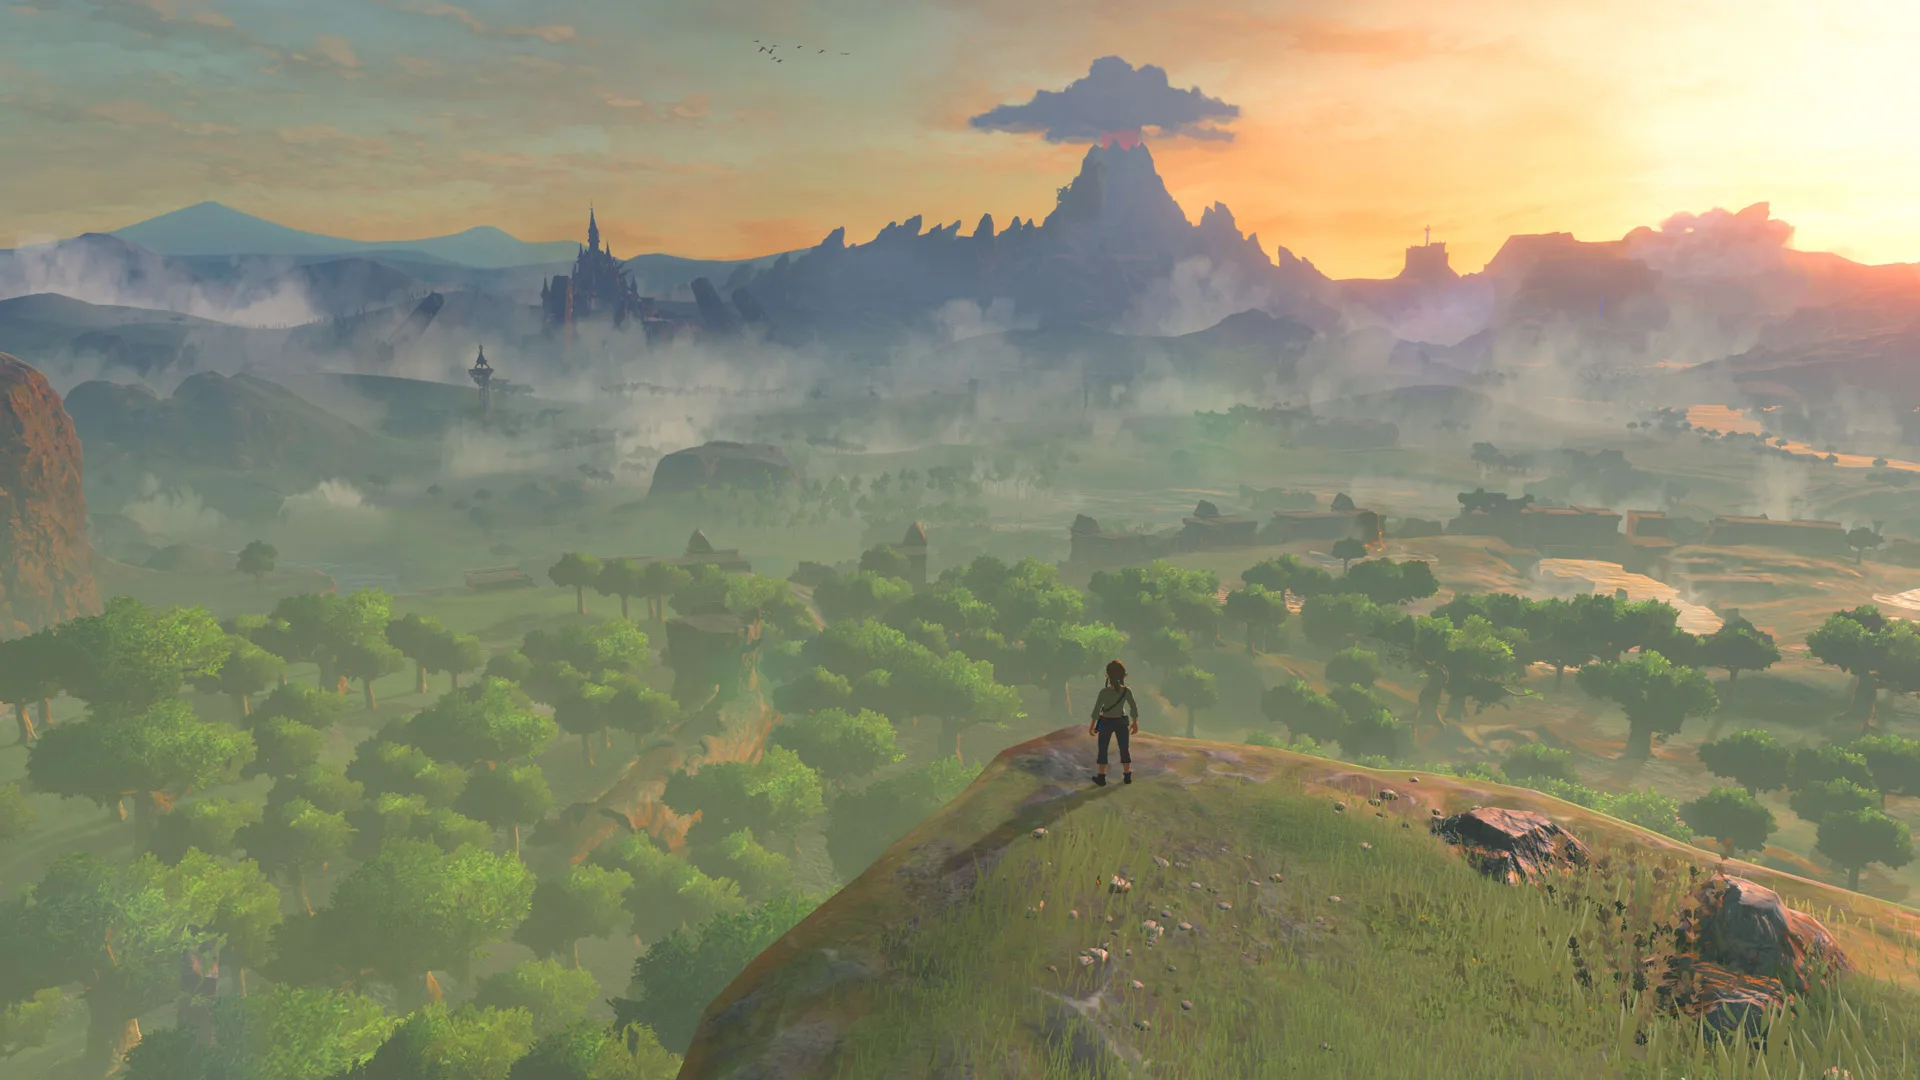 A scene from Zelda: Breath of the Wild showing a vast landscape at dusk with a sunset in the background. Link stands on a hill edge surveying the green landscape where clouds hang low in the distance over the trees.